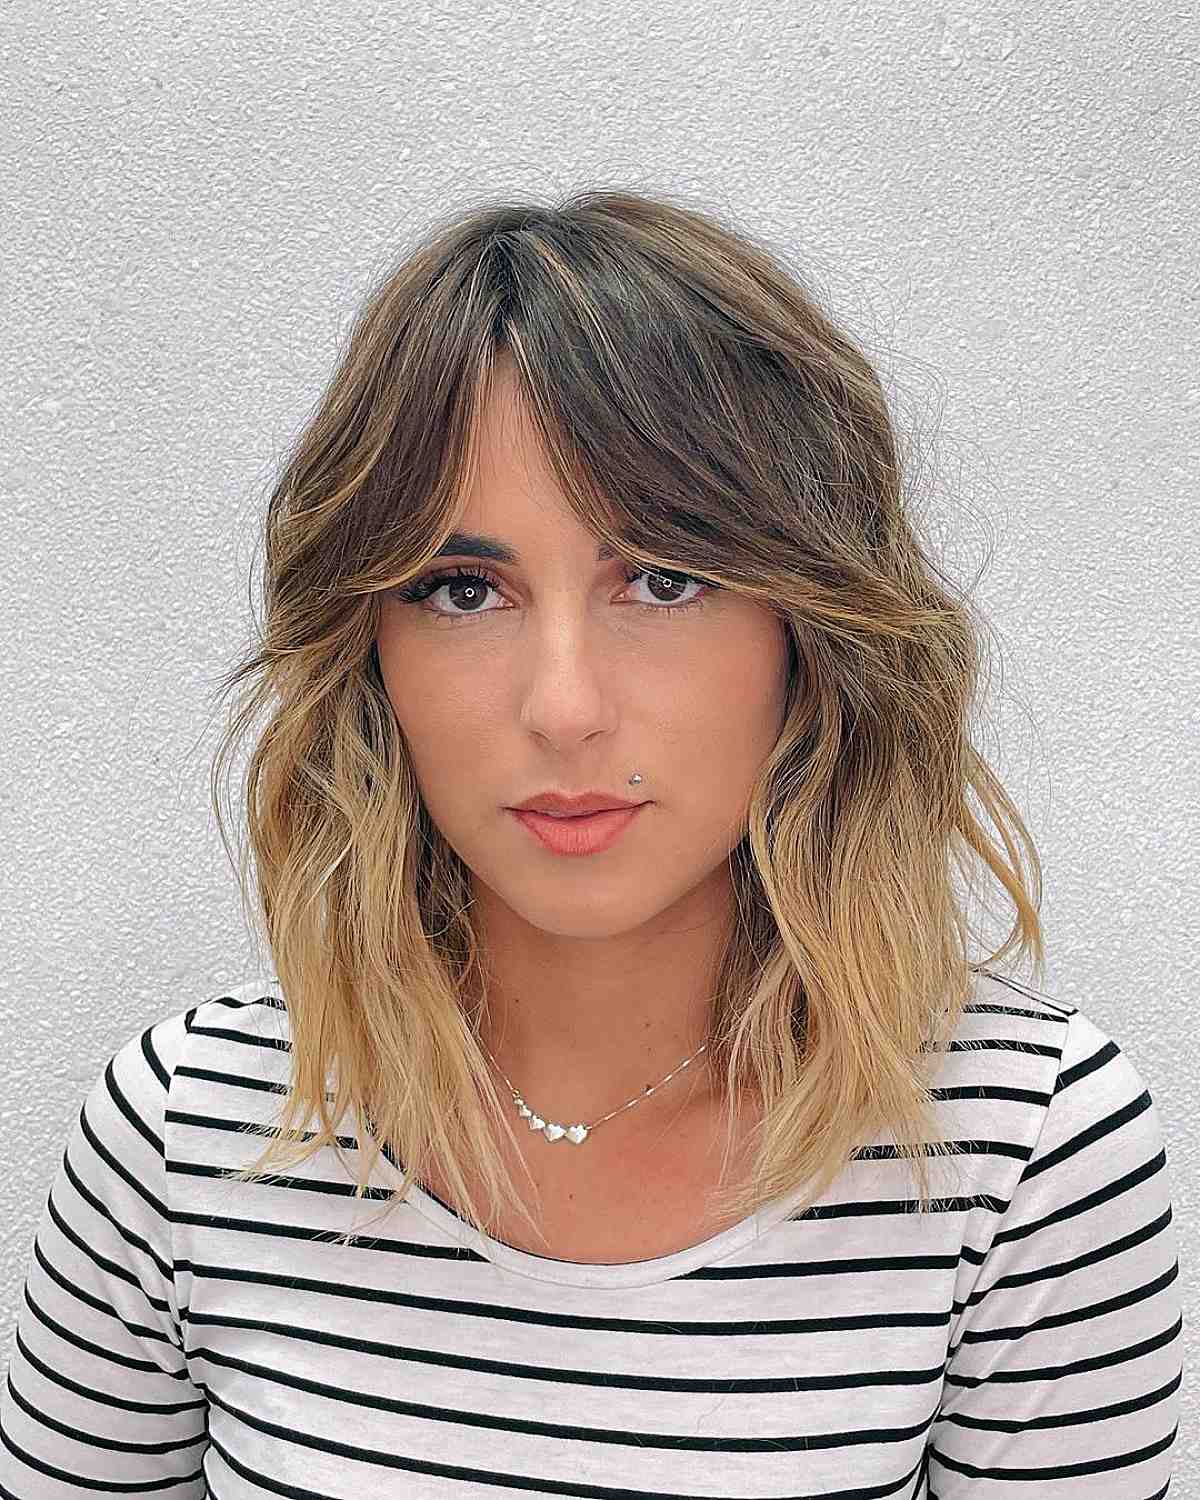 22 Short Messy Hair Ideas To Try in 2023